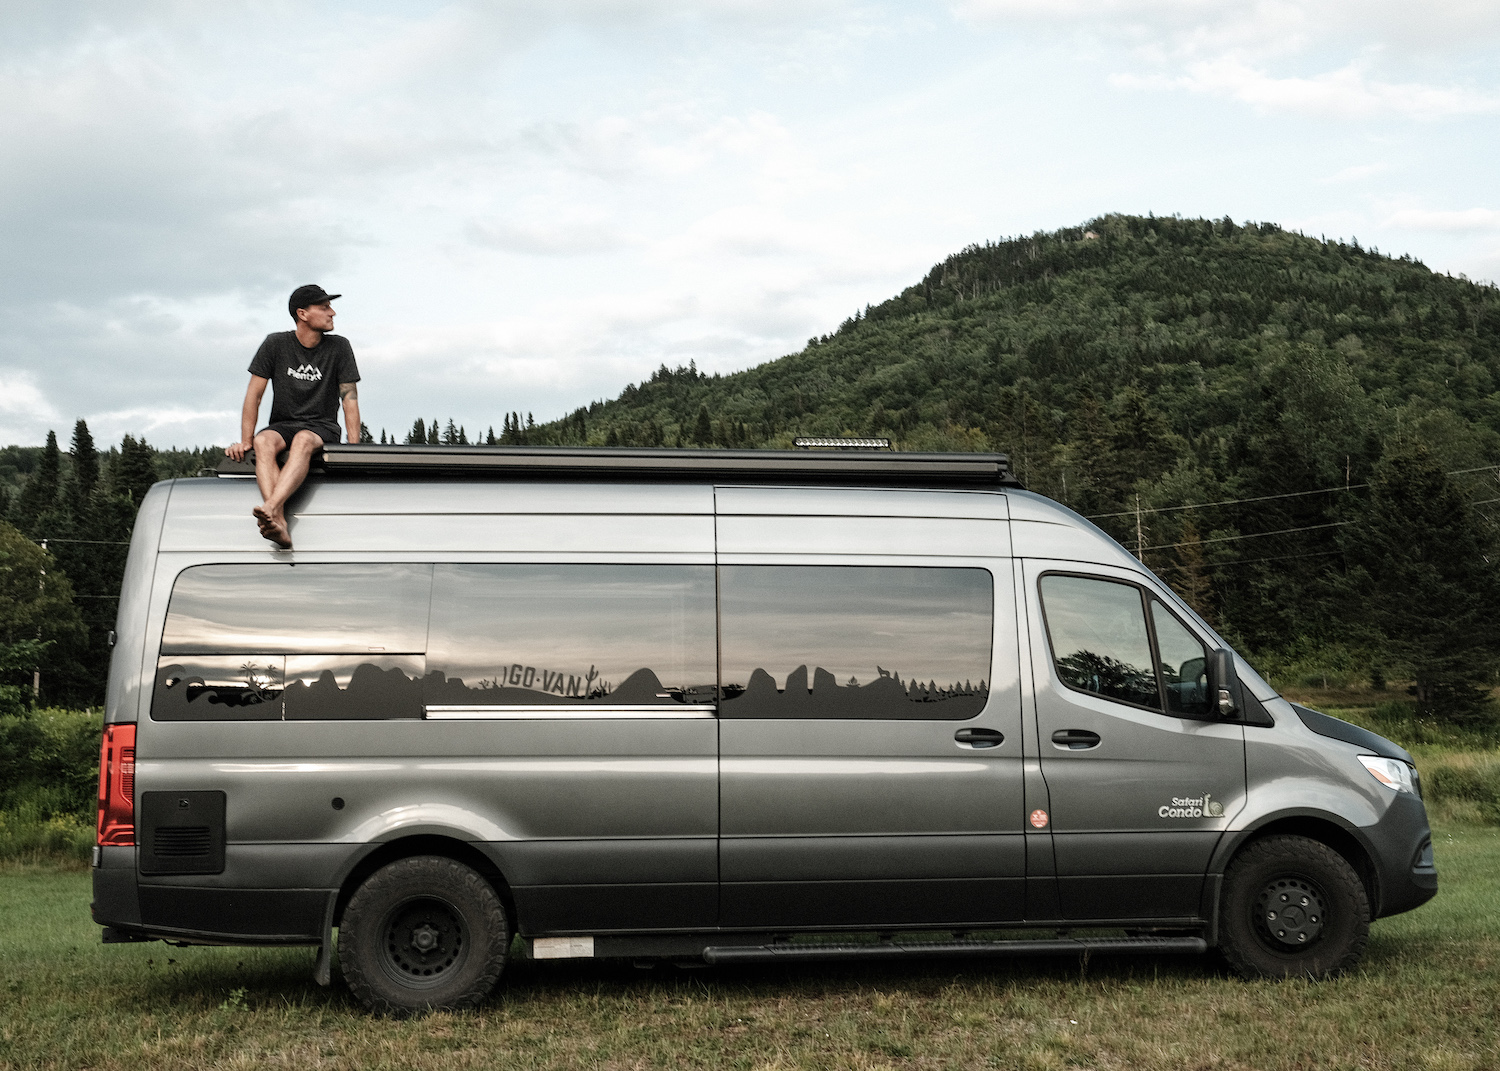 Preparing for a Lifestyle of Minimalism with Vanlife